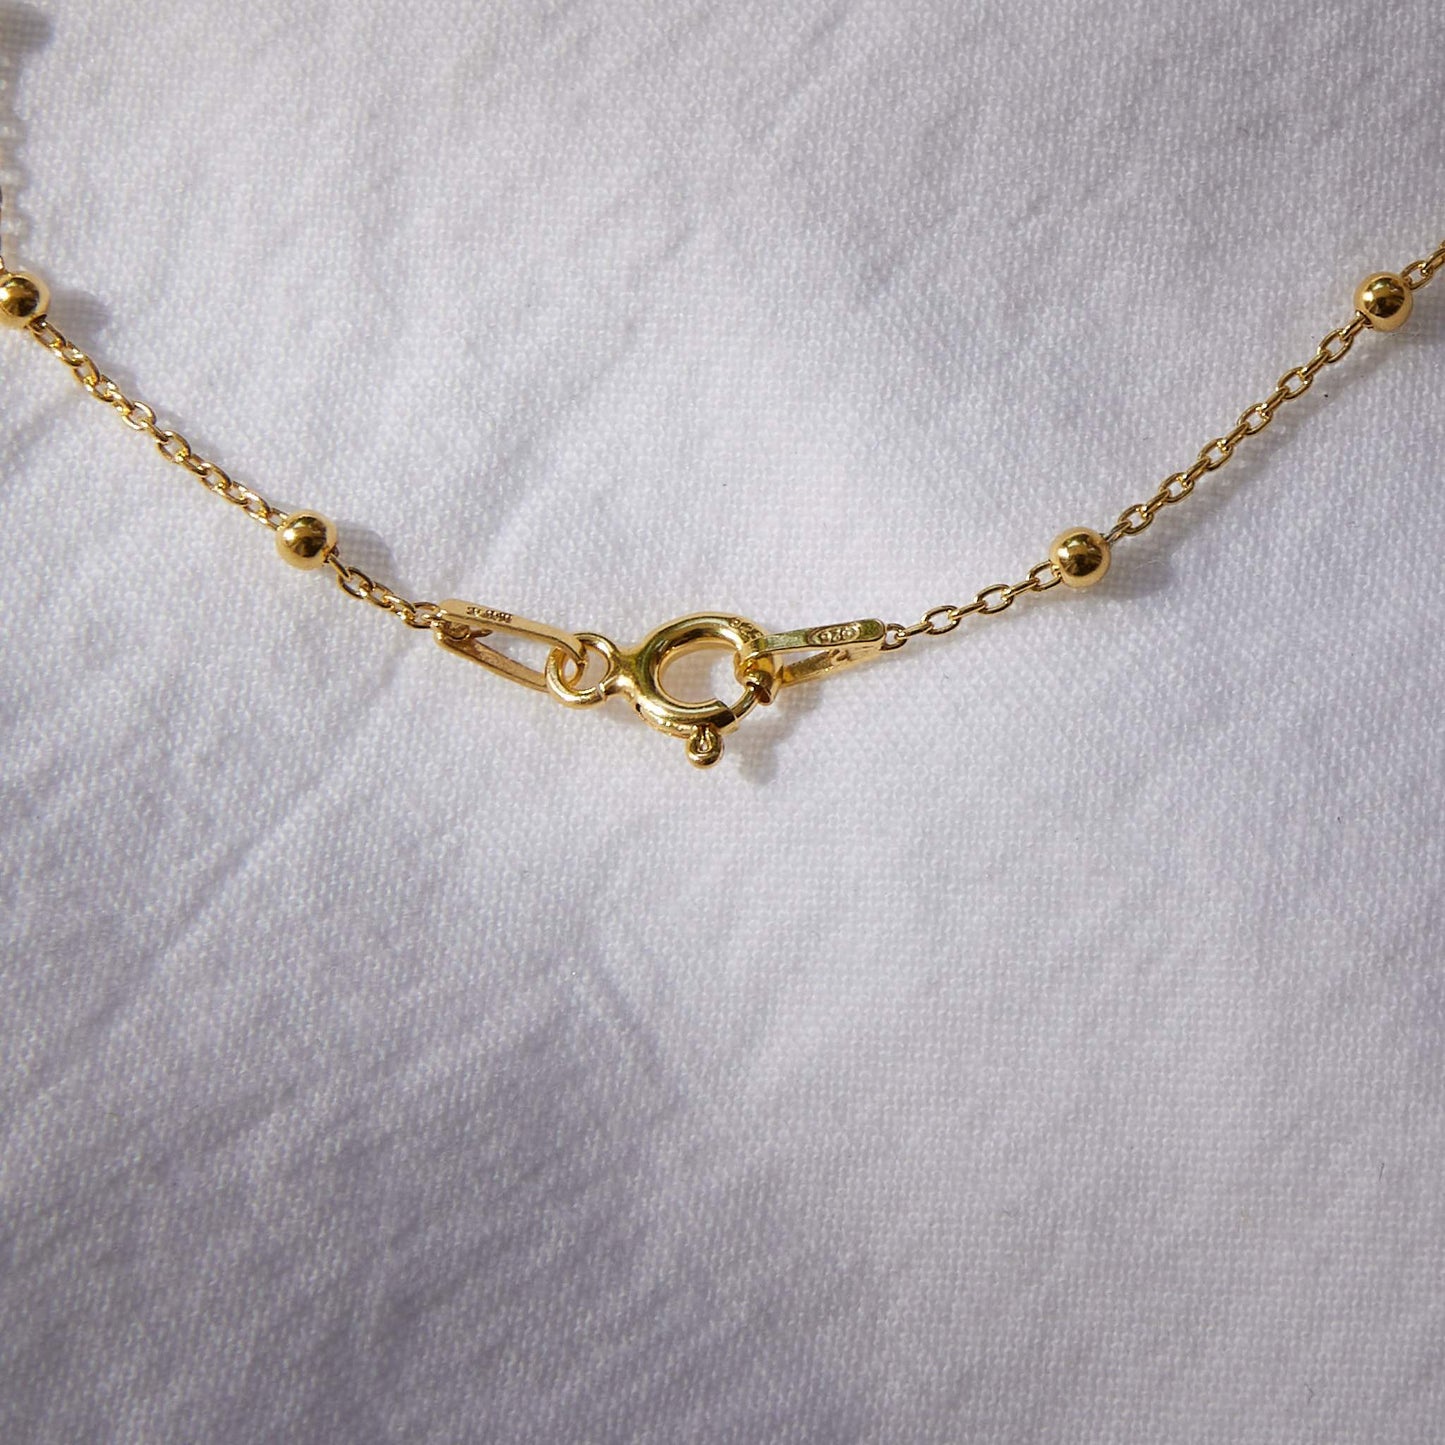 Turtle on 24k gold plated sterling silver ball chain